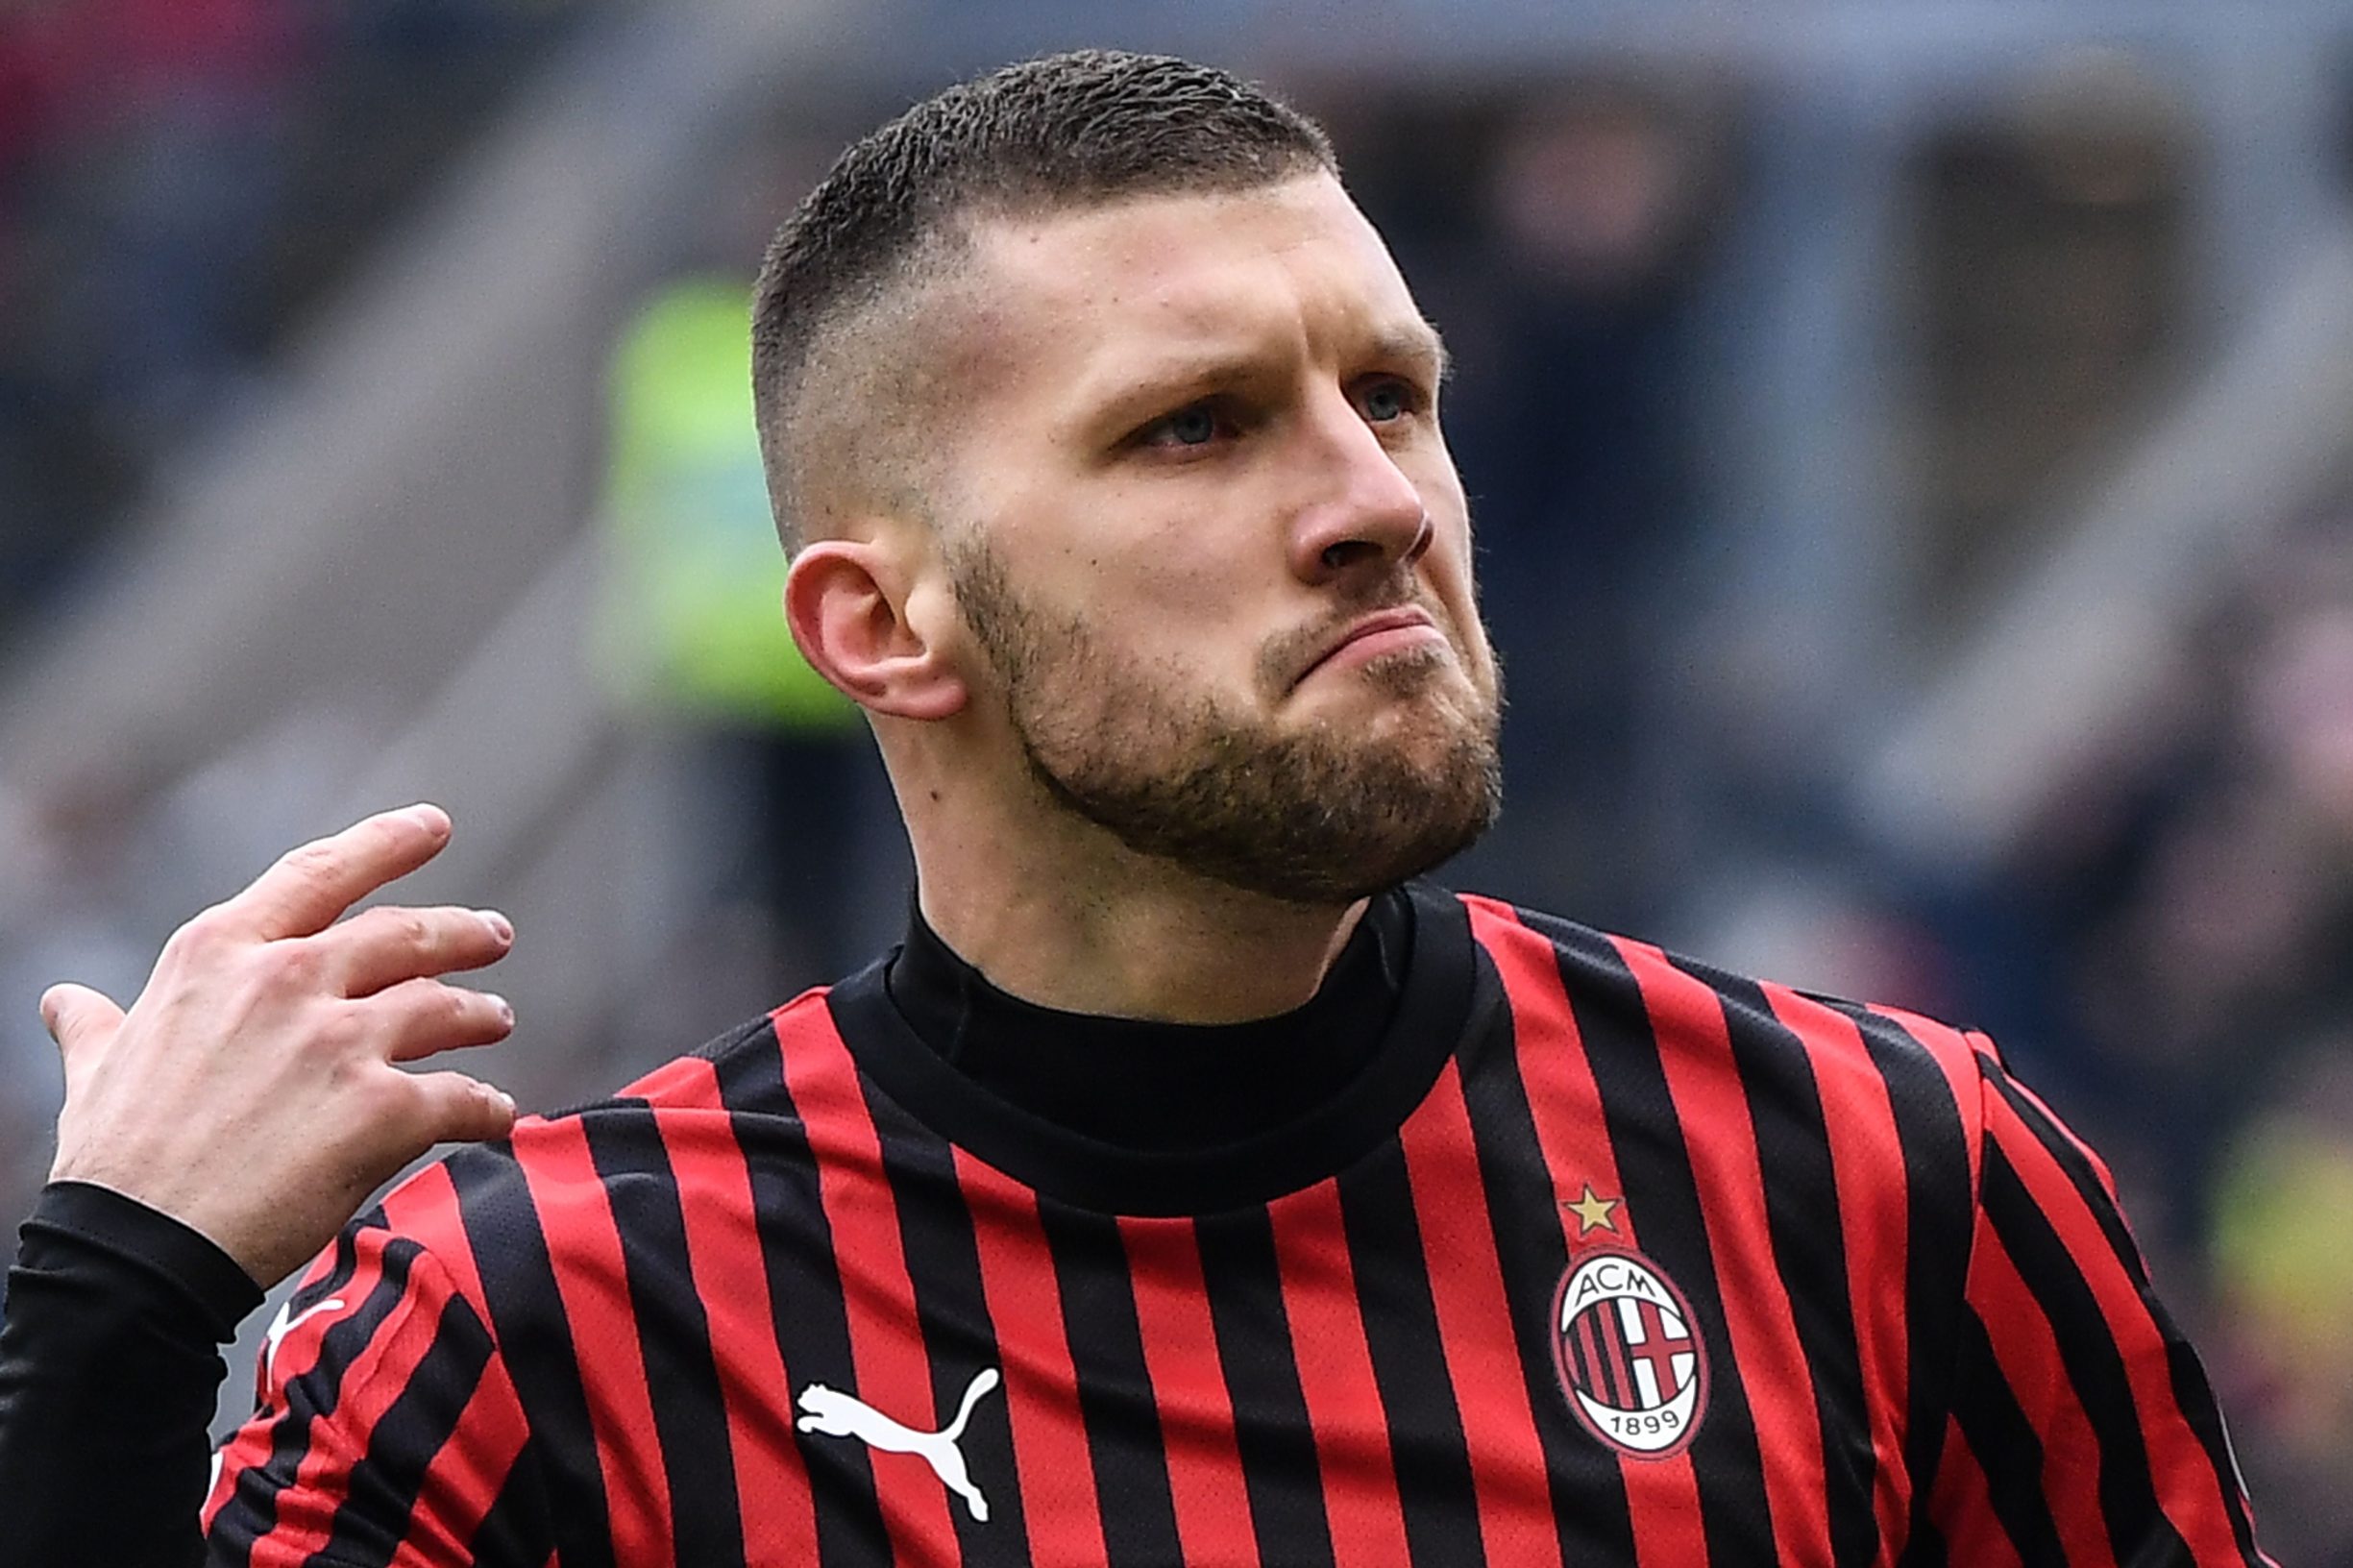 AC Milan's Croatian forward Ante Rebic celebrates after scoring an equalizer during the Italian Serie A football match AC Milan vs Udinese on January 19, 2020 at the San Siro stadium in Milan. (Photo by Marco Bertorello / AFP)